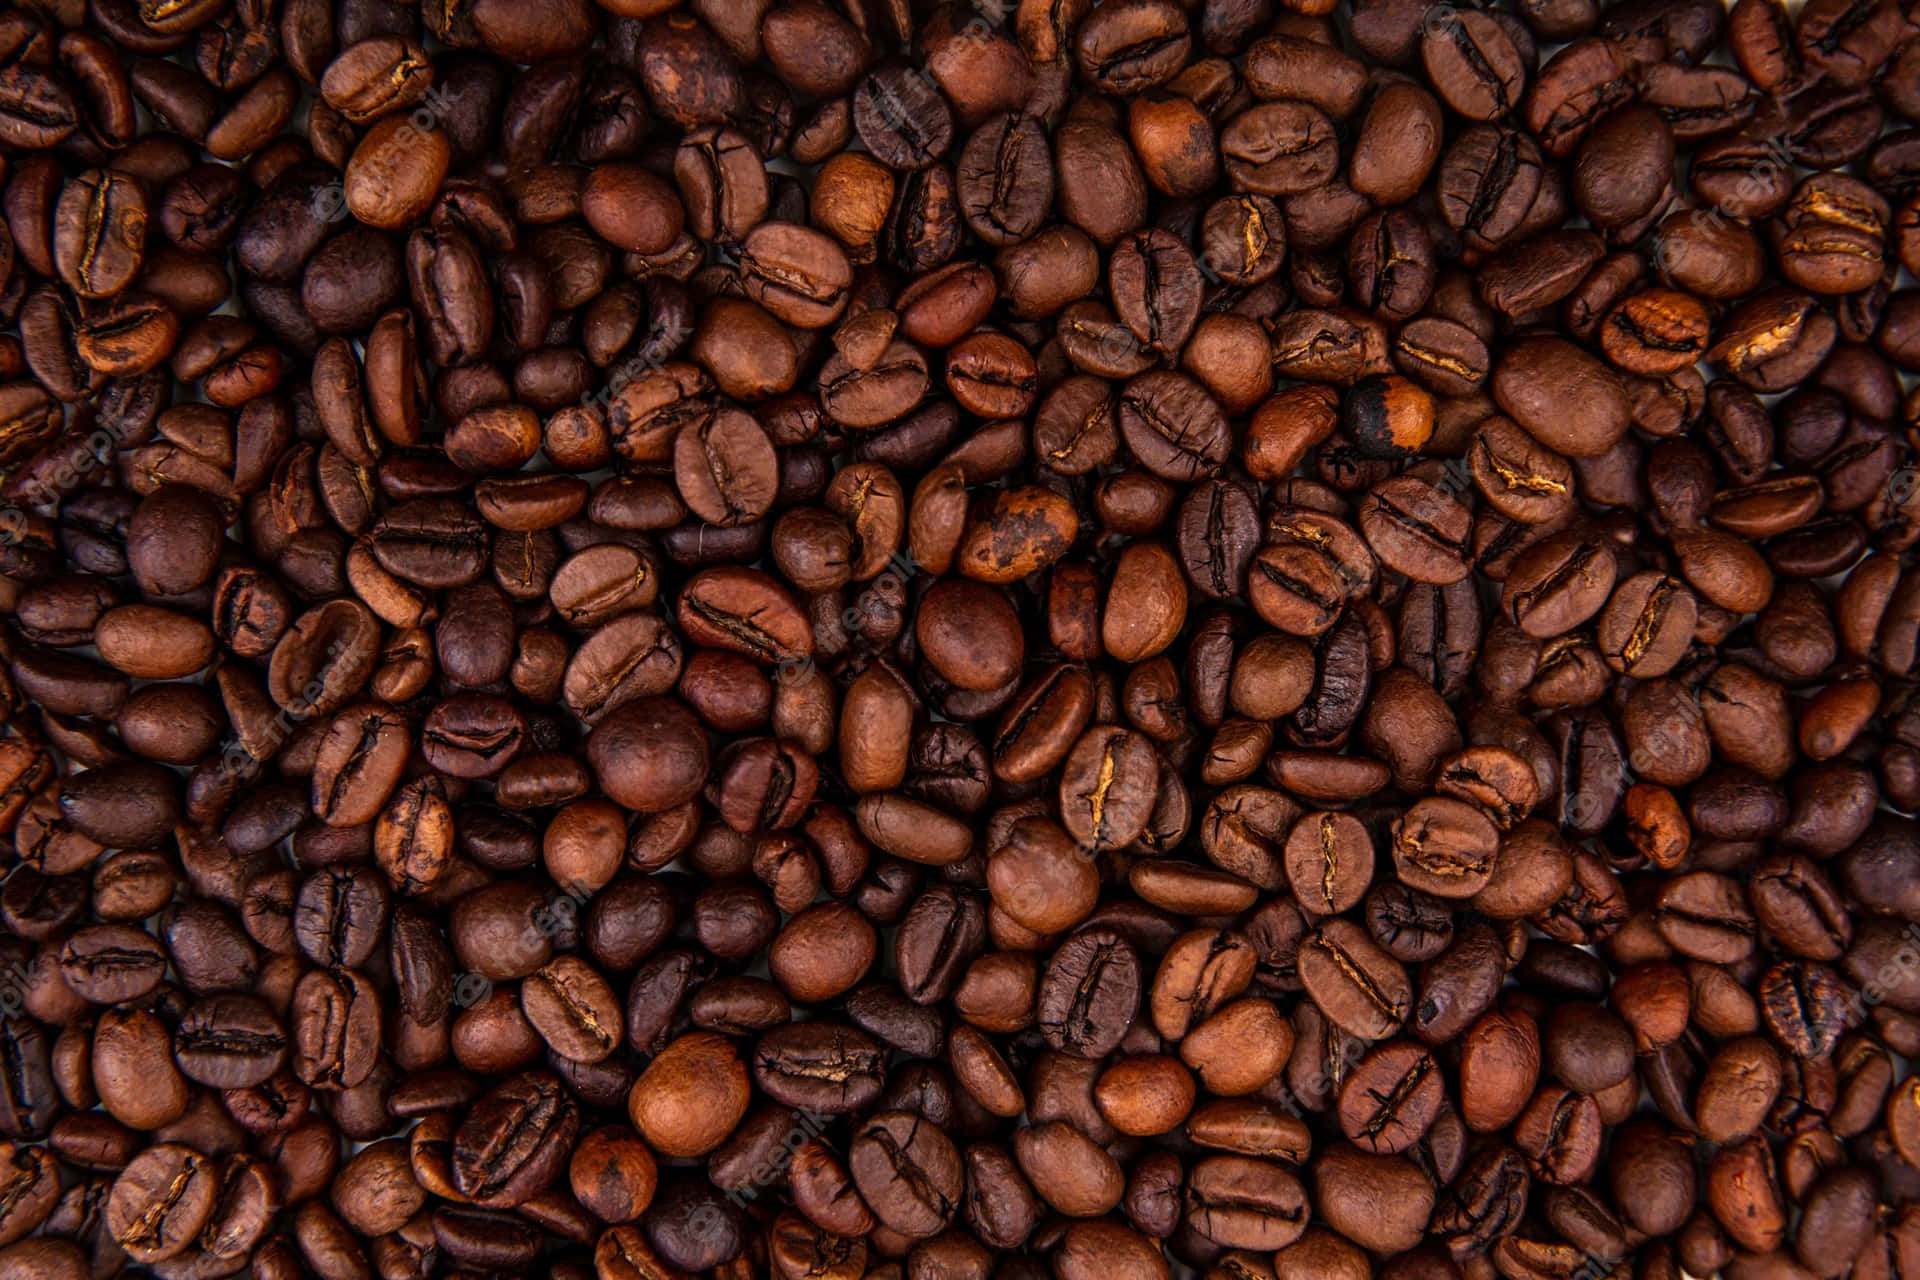 Rich, aromatic natural coffee beans for a perfect cup